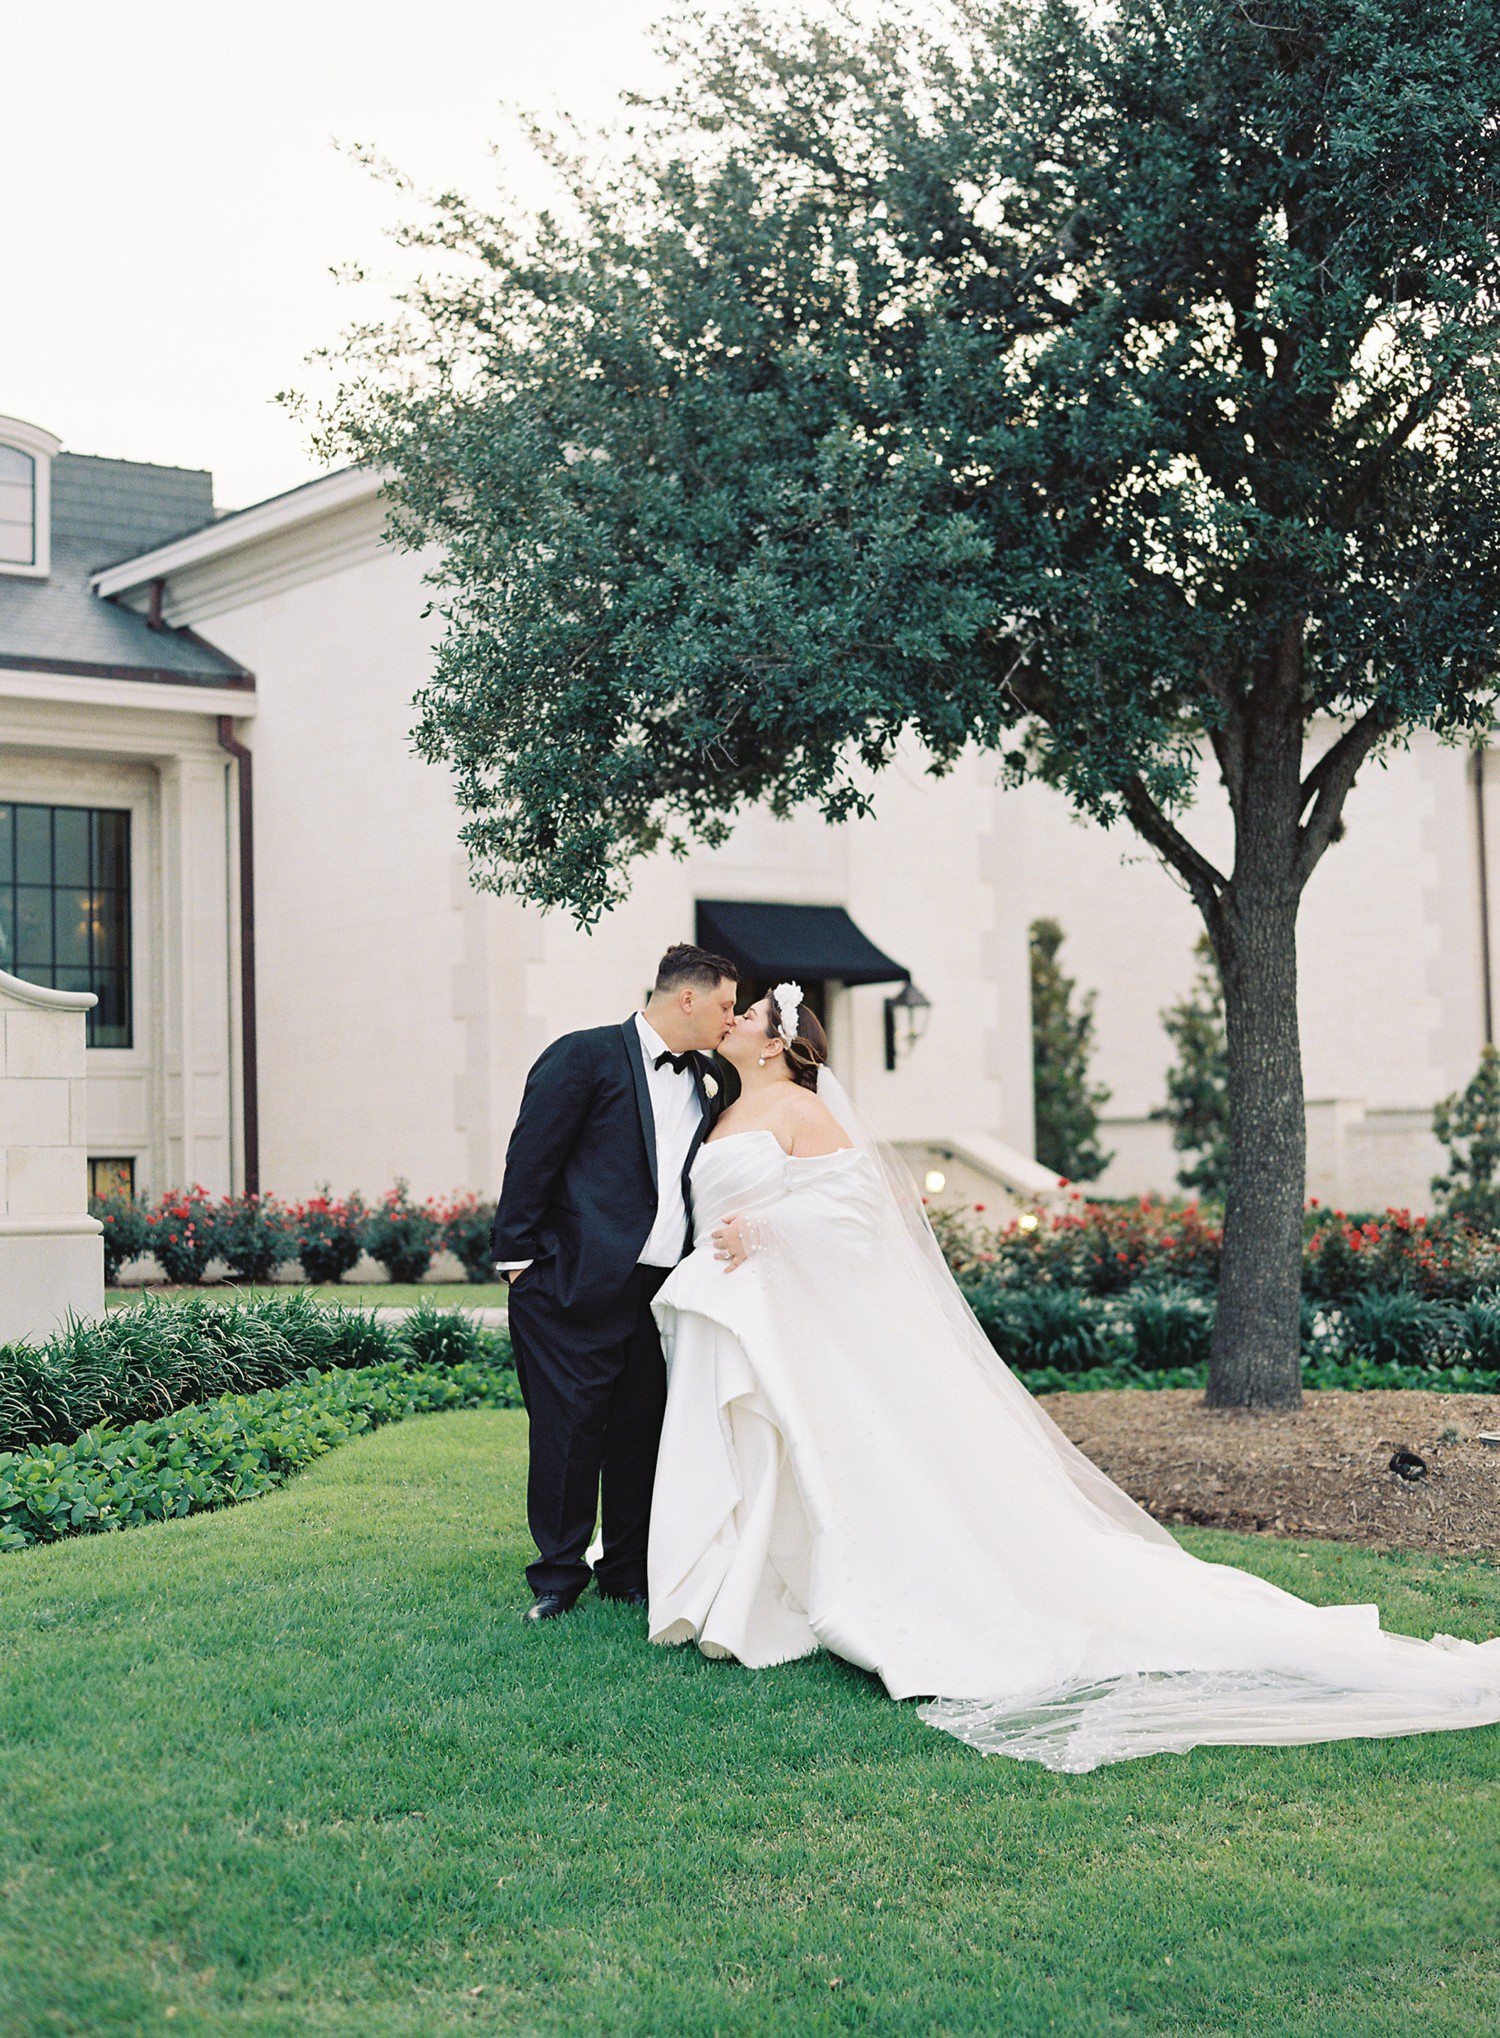 Bride and groom at wedding at Lakeside Country Club in Houston Texas.